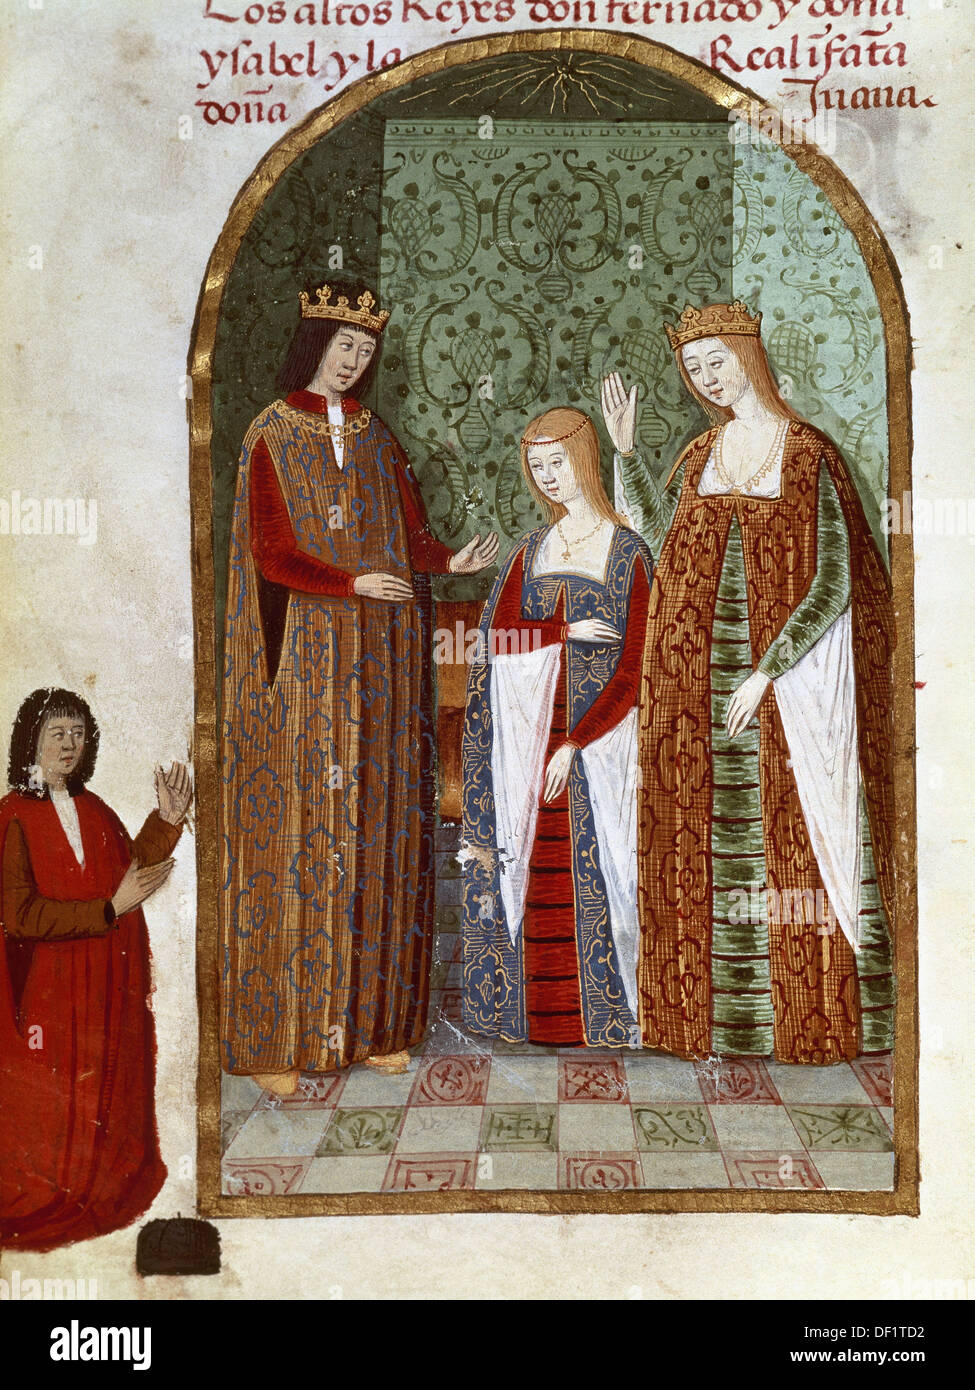 Isabella I of Castile (1451-1504), Ferdinand II of Aragon (1452-1516) and their daughter Joanna of Castile(1478-1555). Stock Photo